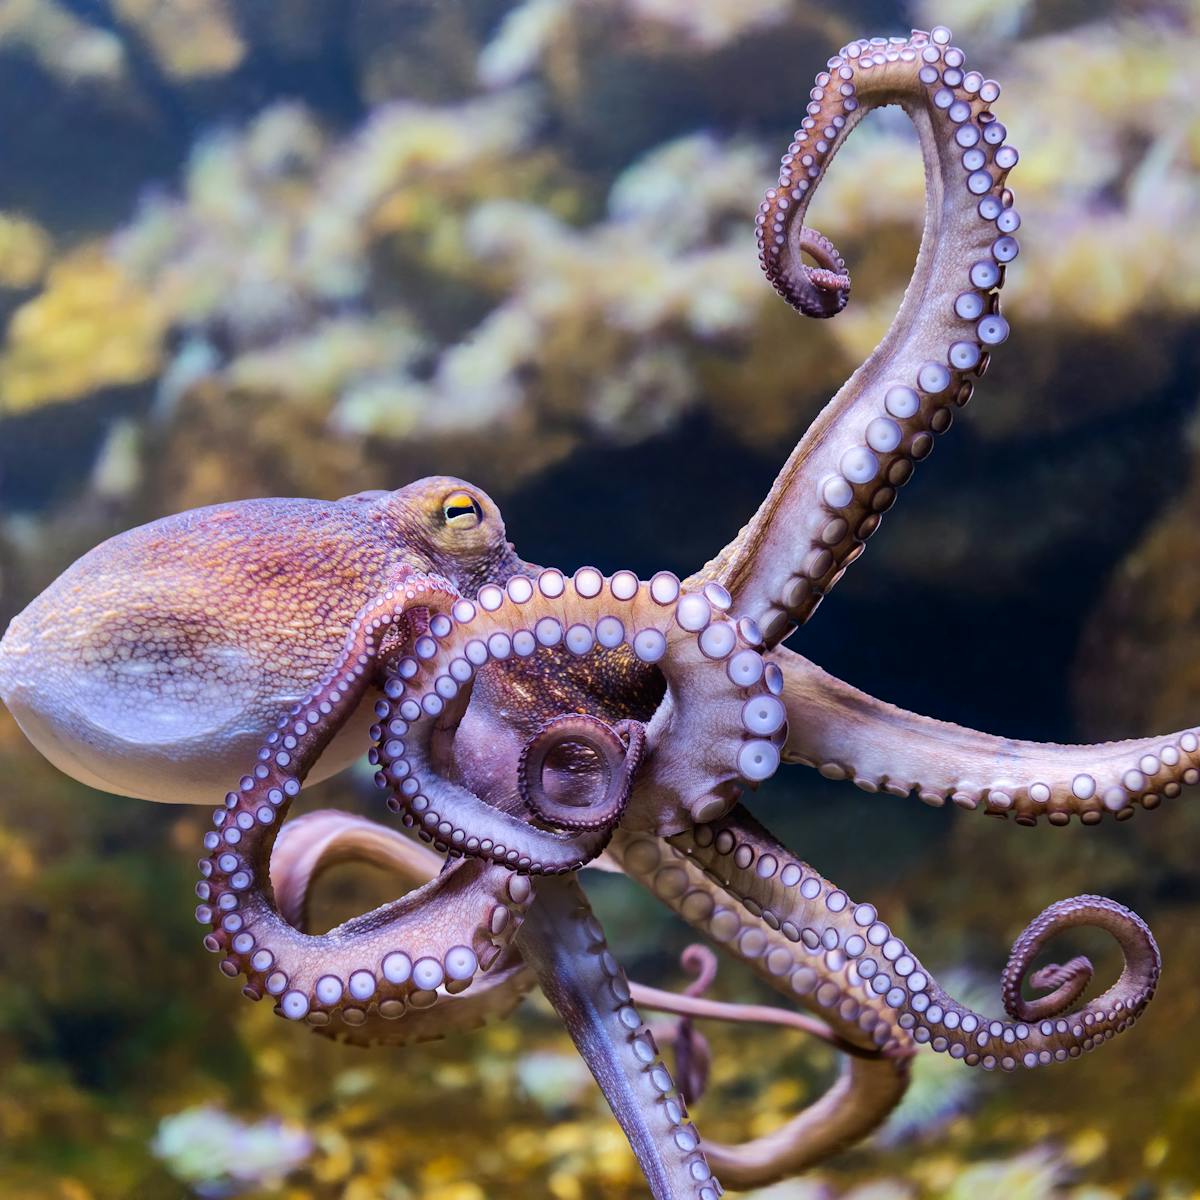 Sleeping octopuses might experience fleeting dreams -- new study